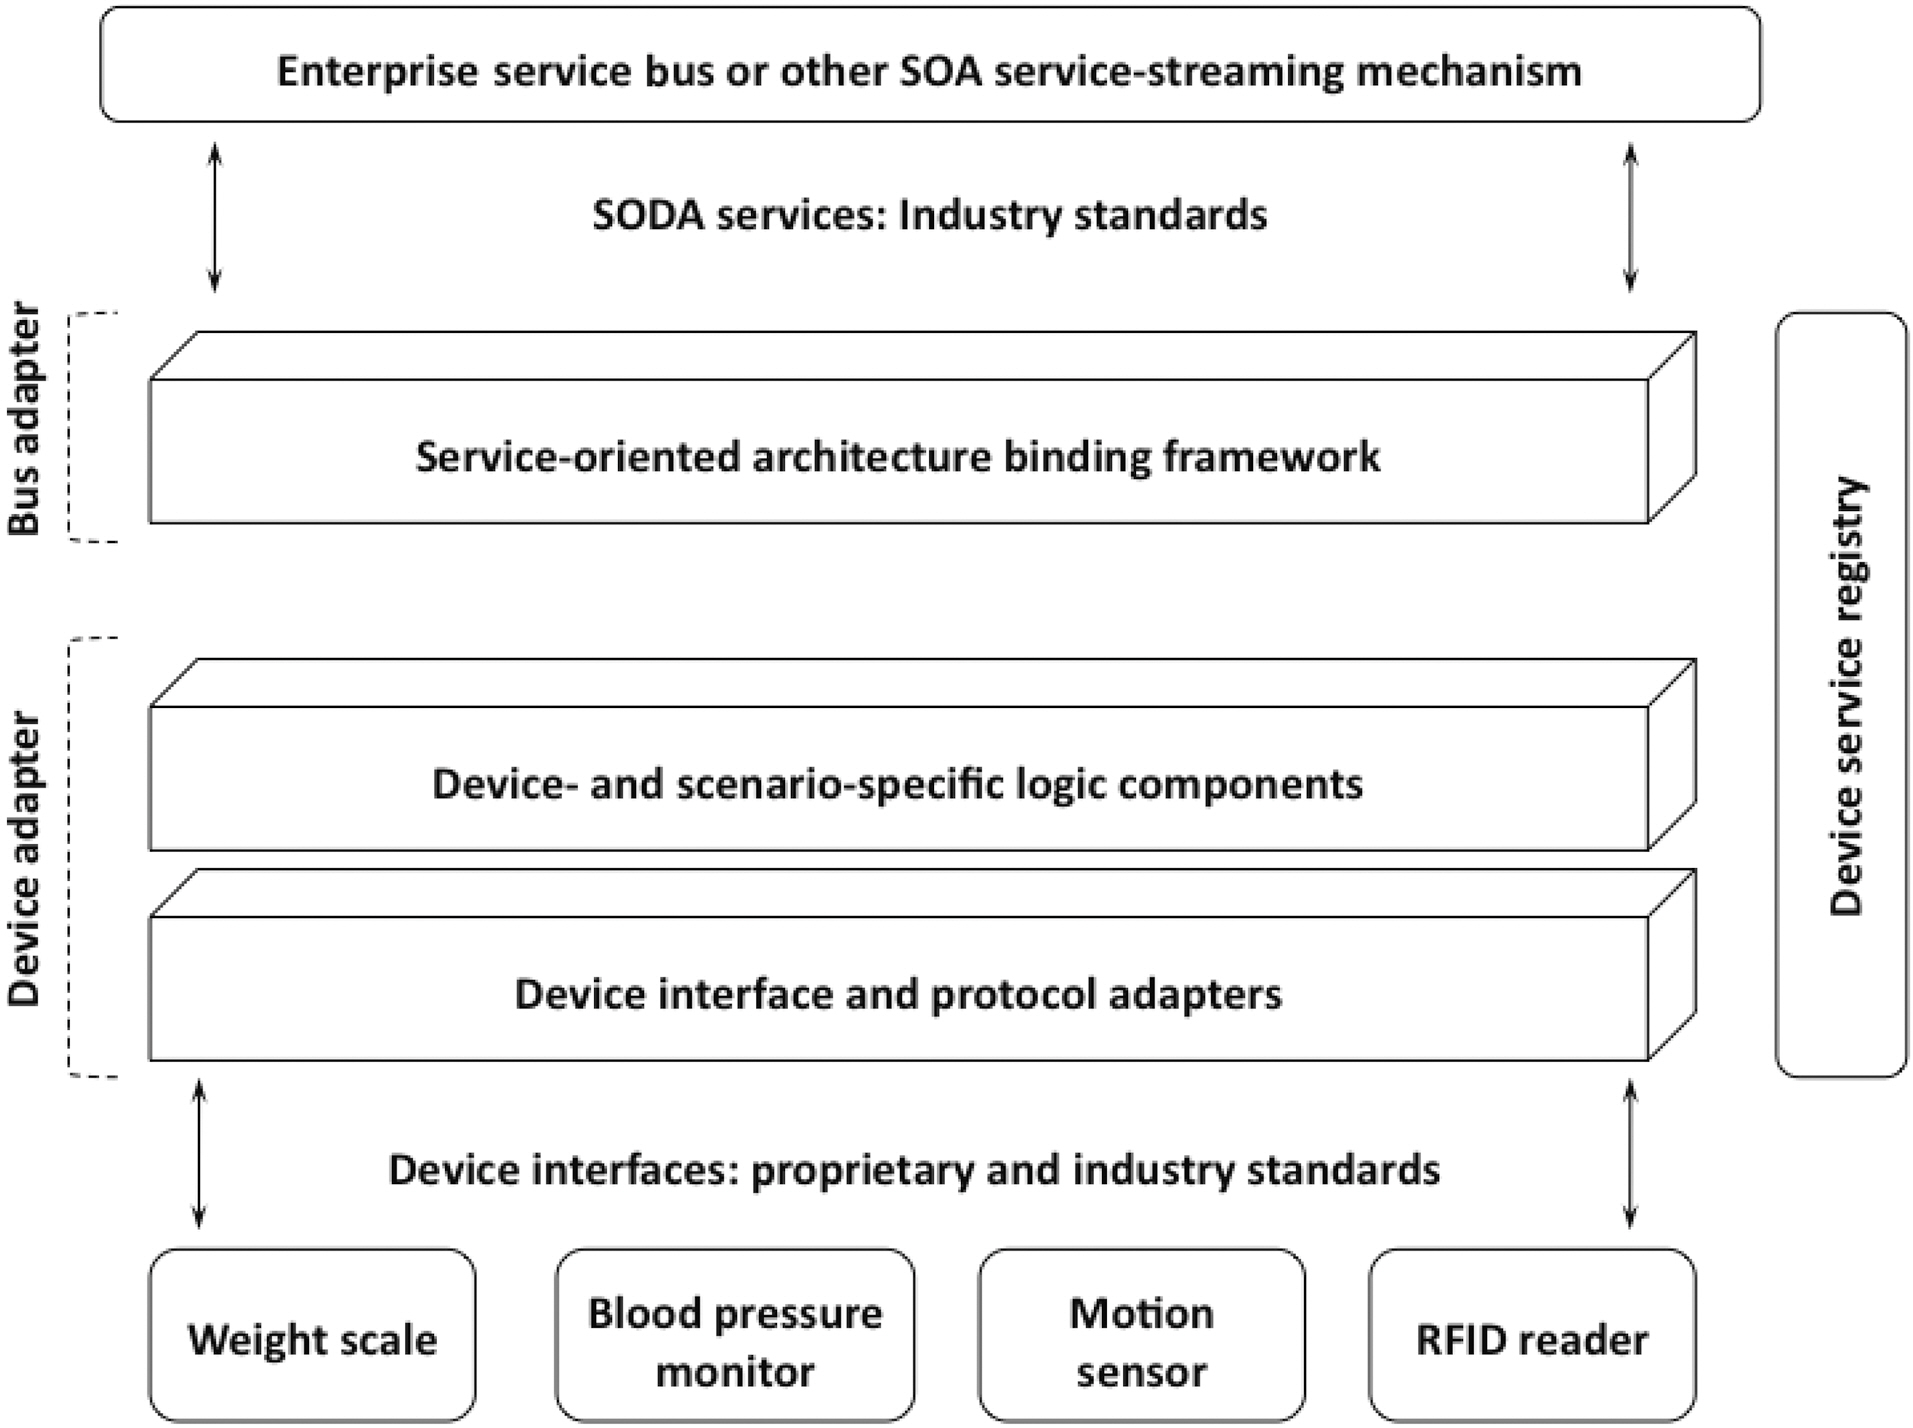 Service-oriented device architecture (SODA) implementation.